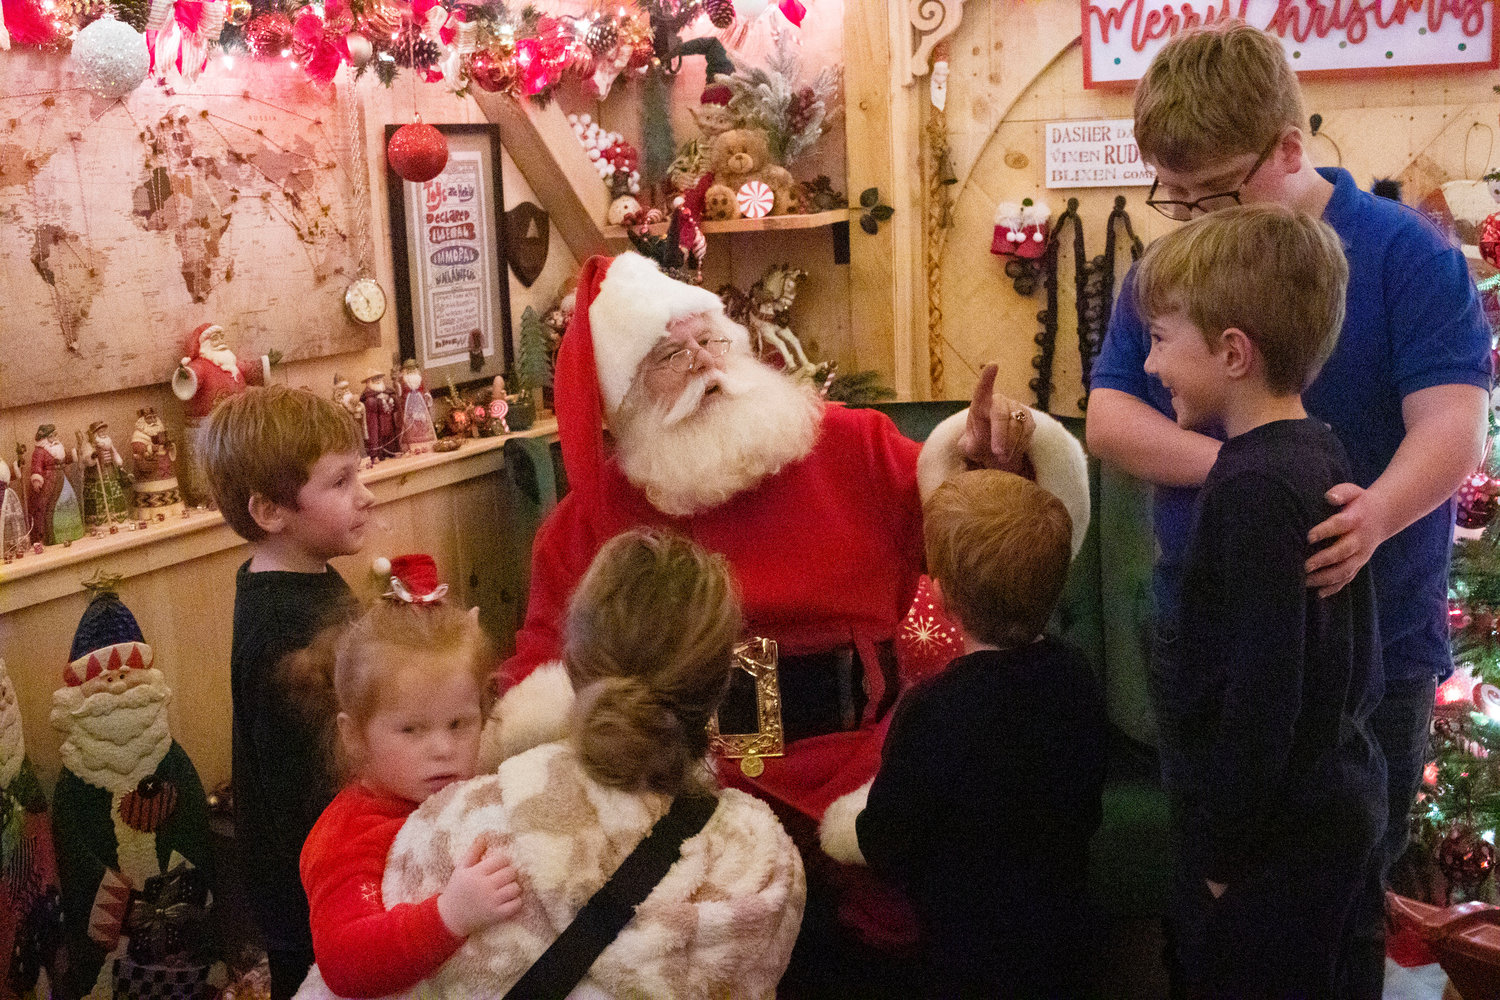 Noah Gill, 4, (left), Penny Gill, 2, with mom, Brady Gill, 6, Aidan Gill, 8, and William Gill, 12, chat with Santa inside the Santa House.